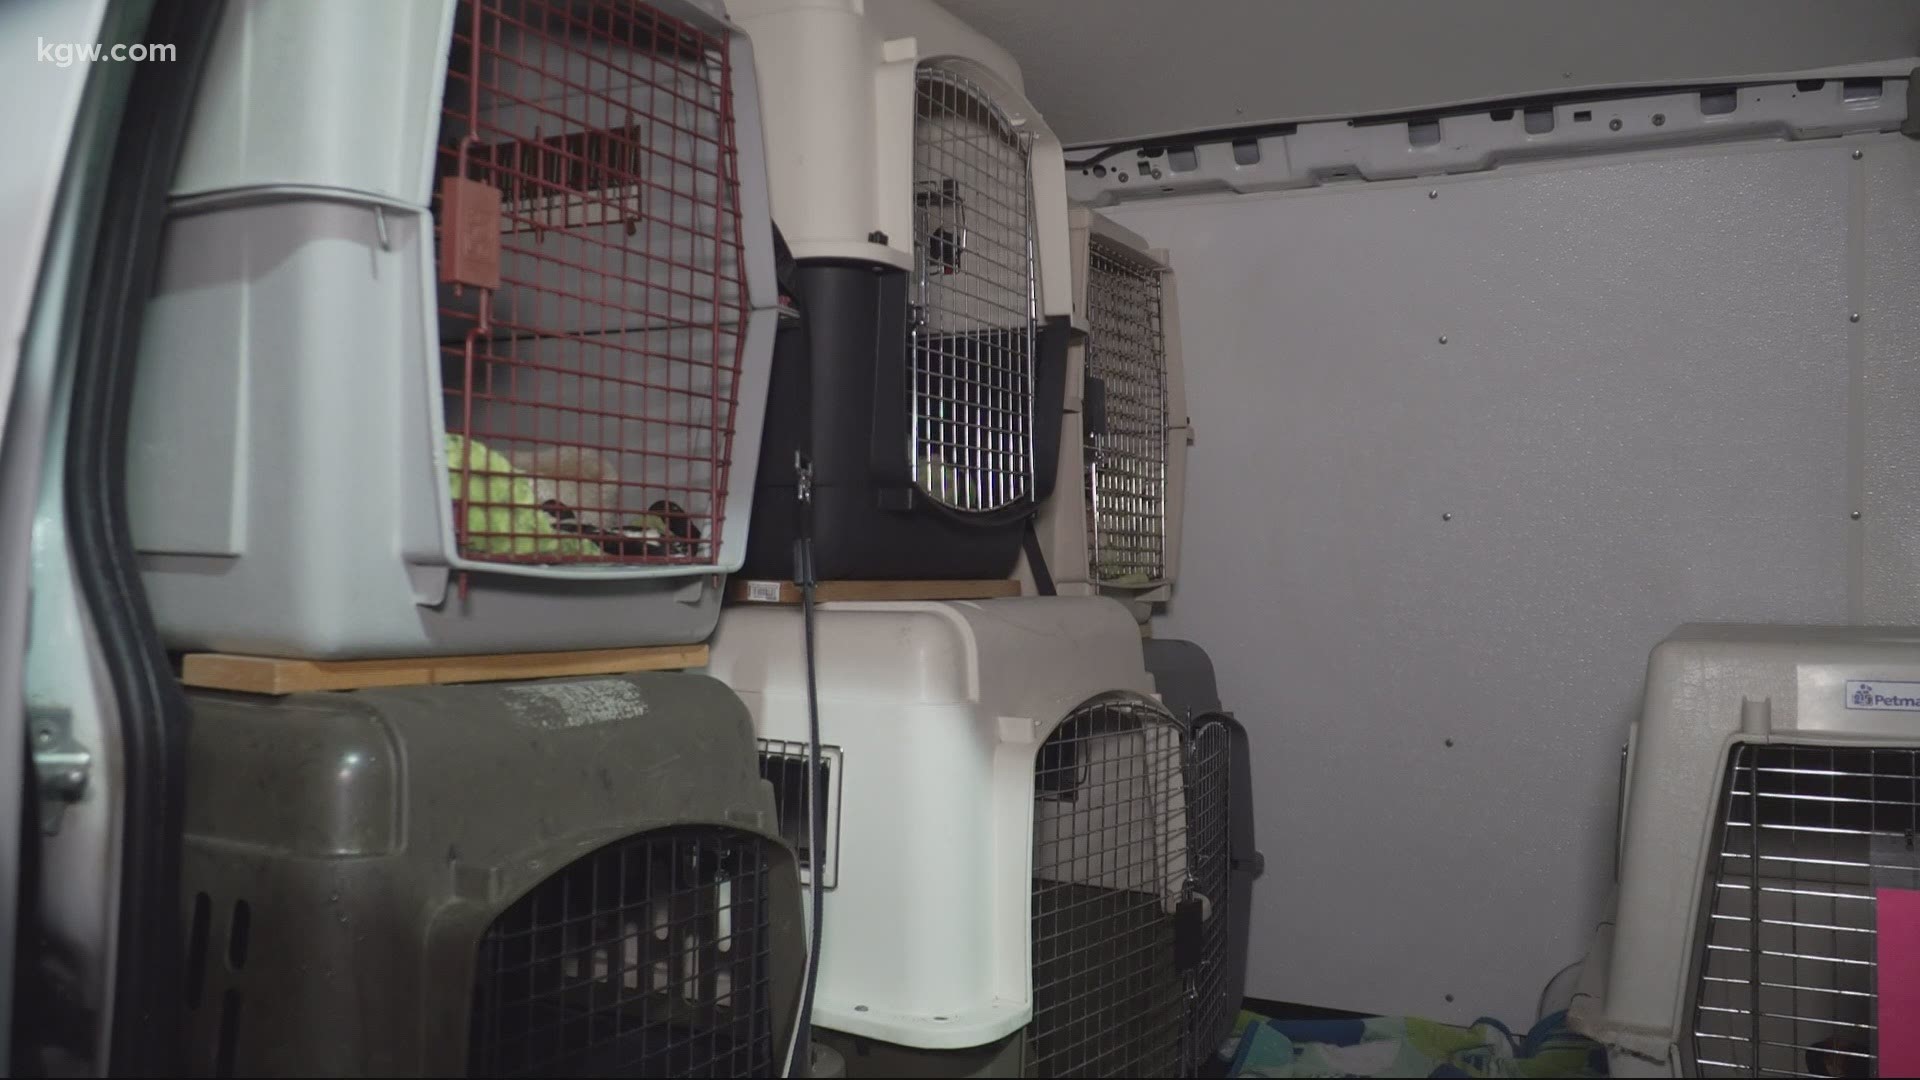 A scary situation had a happy ending after a man stole a van loaded with a dozen dogs in Northwest Portland.